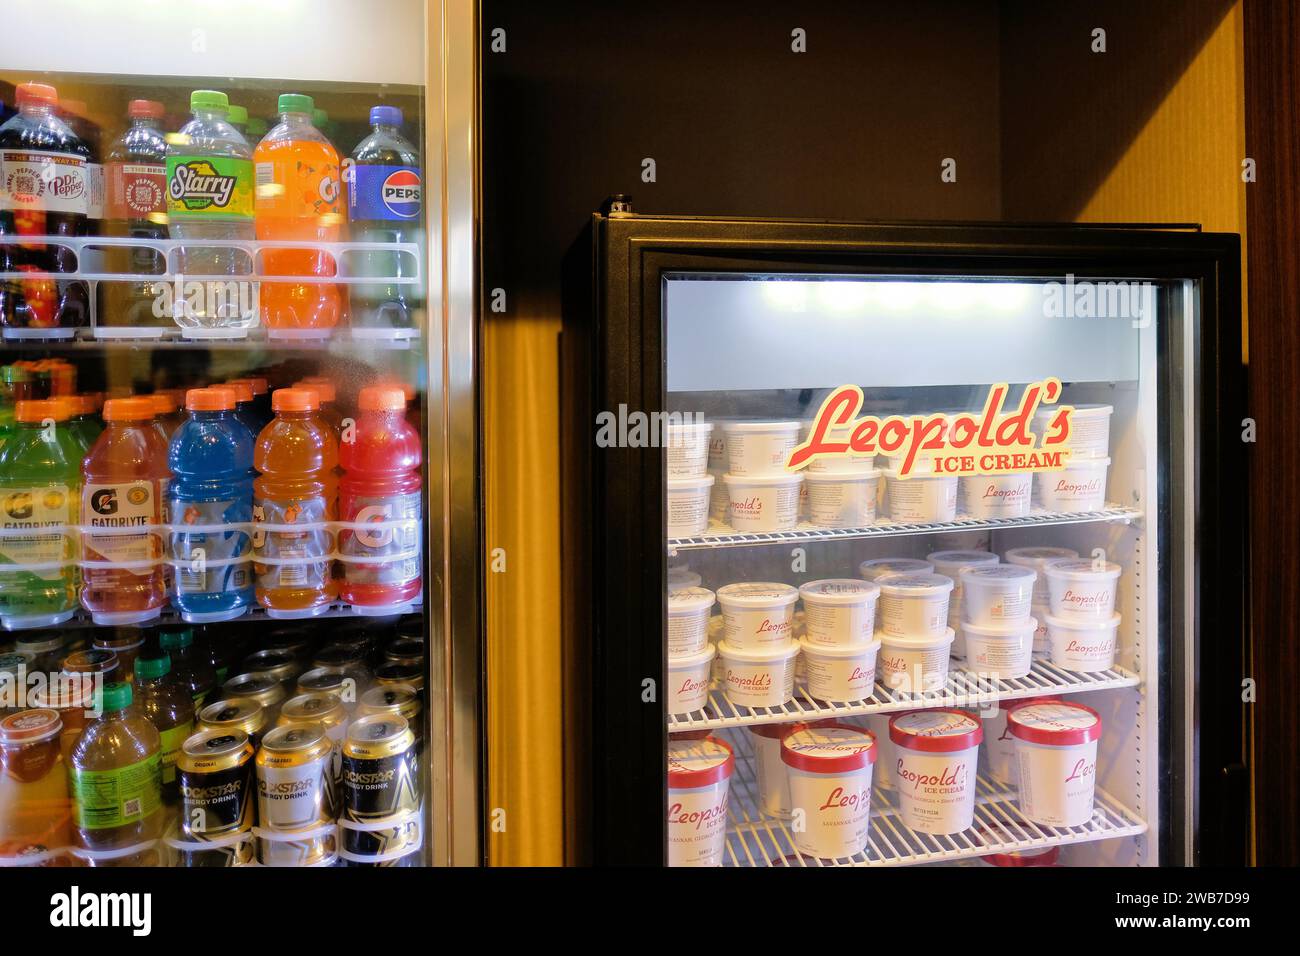 Leopold's Ice Cream refrigerator with tubs for sale; Leopold's was founded in Savannah, Georgia in 1919 and is a locally made local favorite. Stock Photo